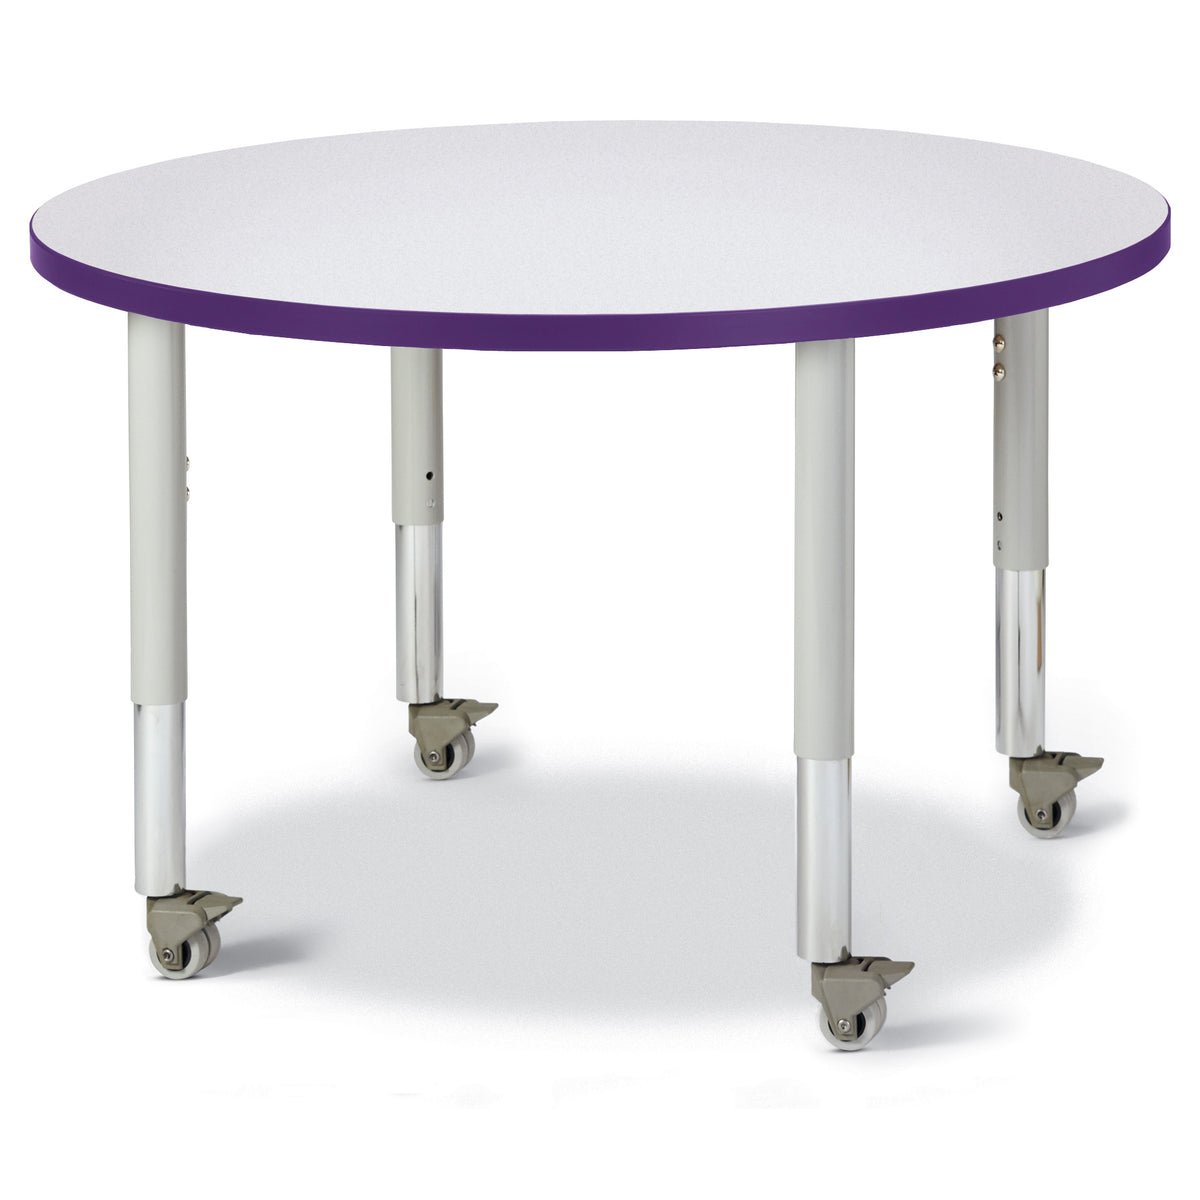 6488JCM004, Berries Round Activity Table - 36" Diameter, Mobile - Freckled Gray/Purple/Gray